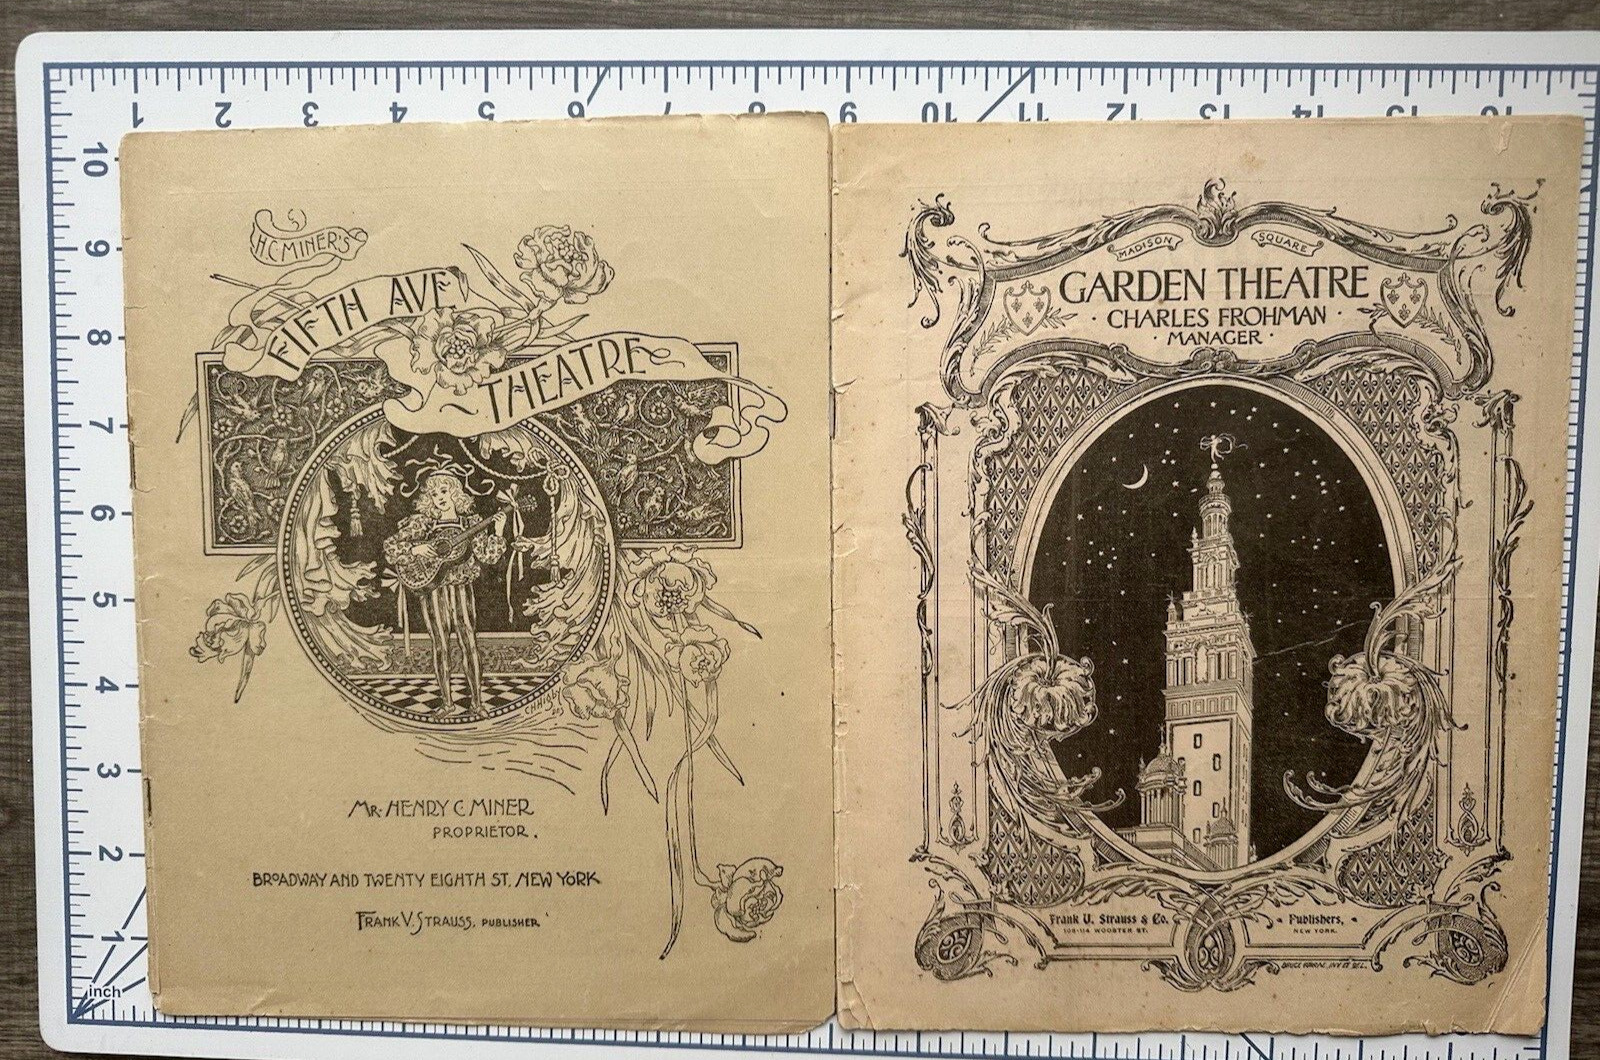 ANTIQUE 1890's THEATRE PROGRAMS - FIFTH AVE and GARDEN THEATRE  New York Lot 2